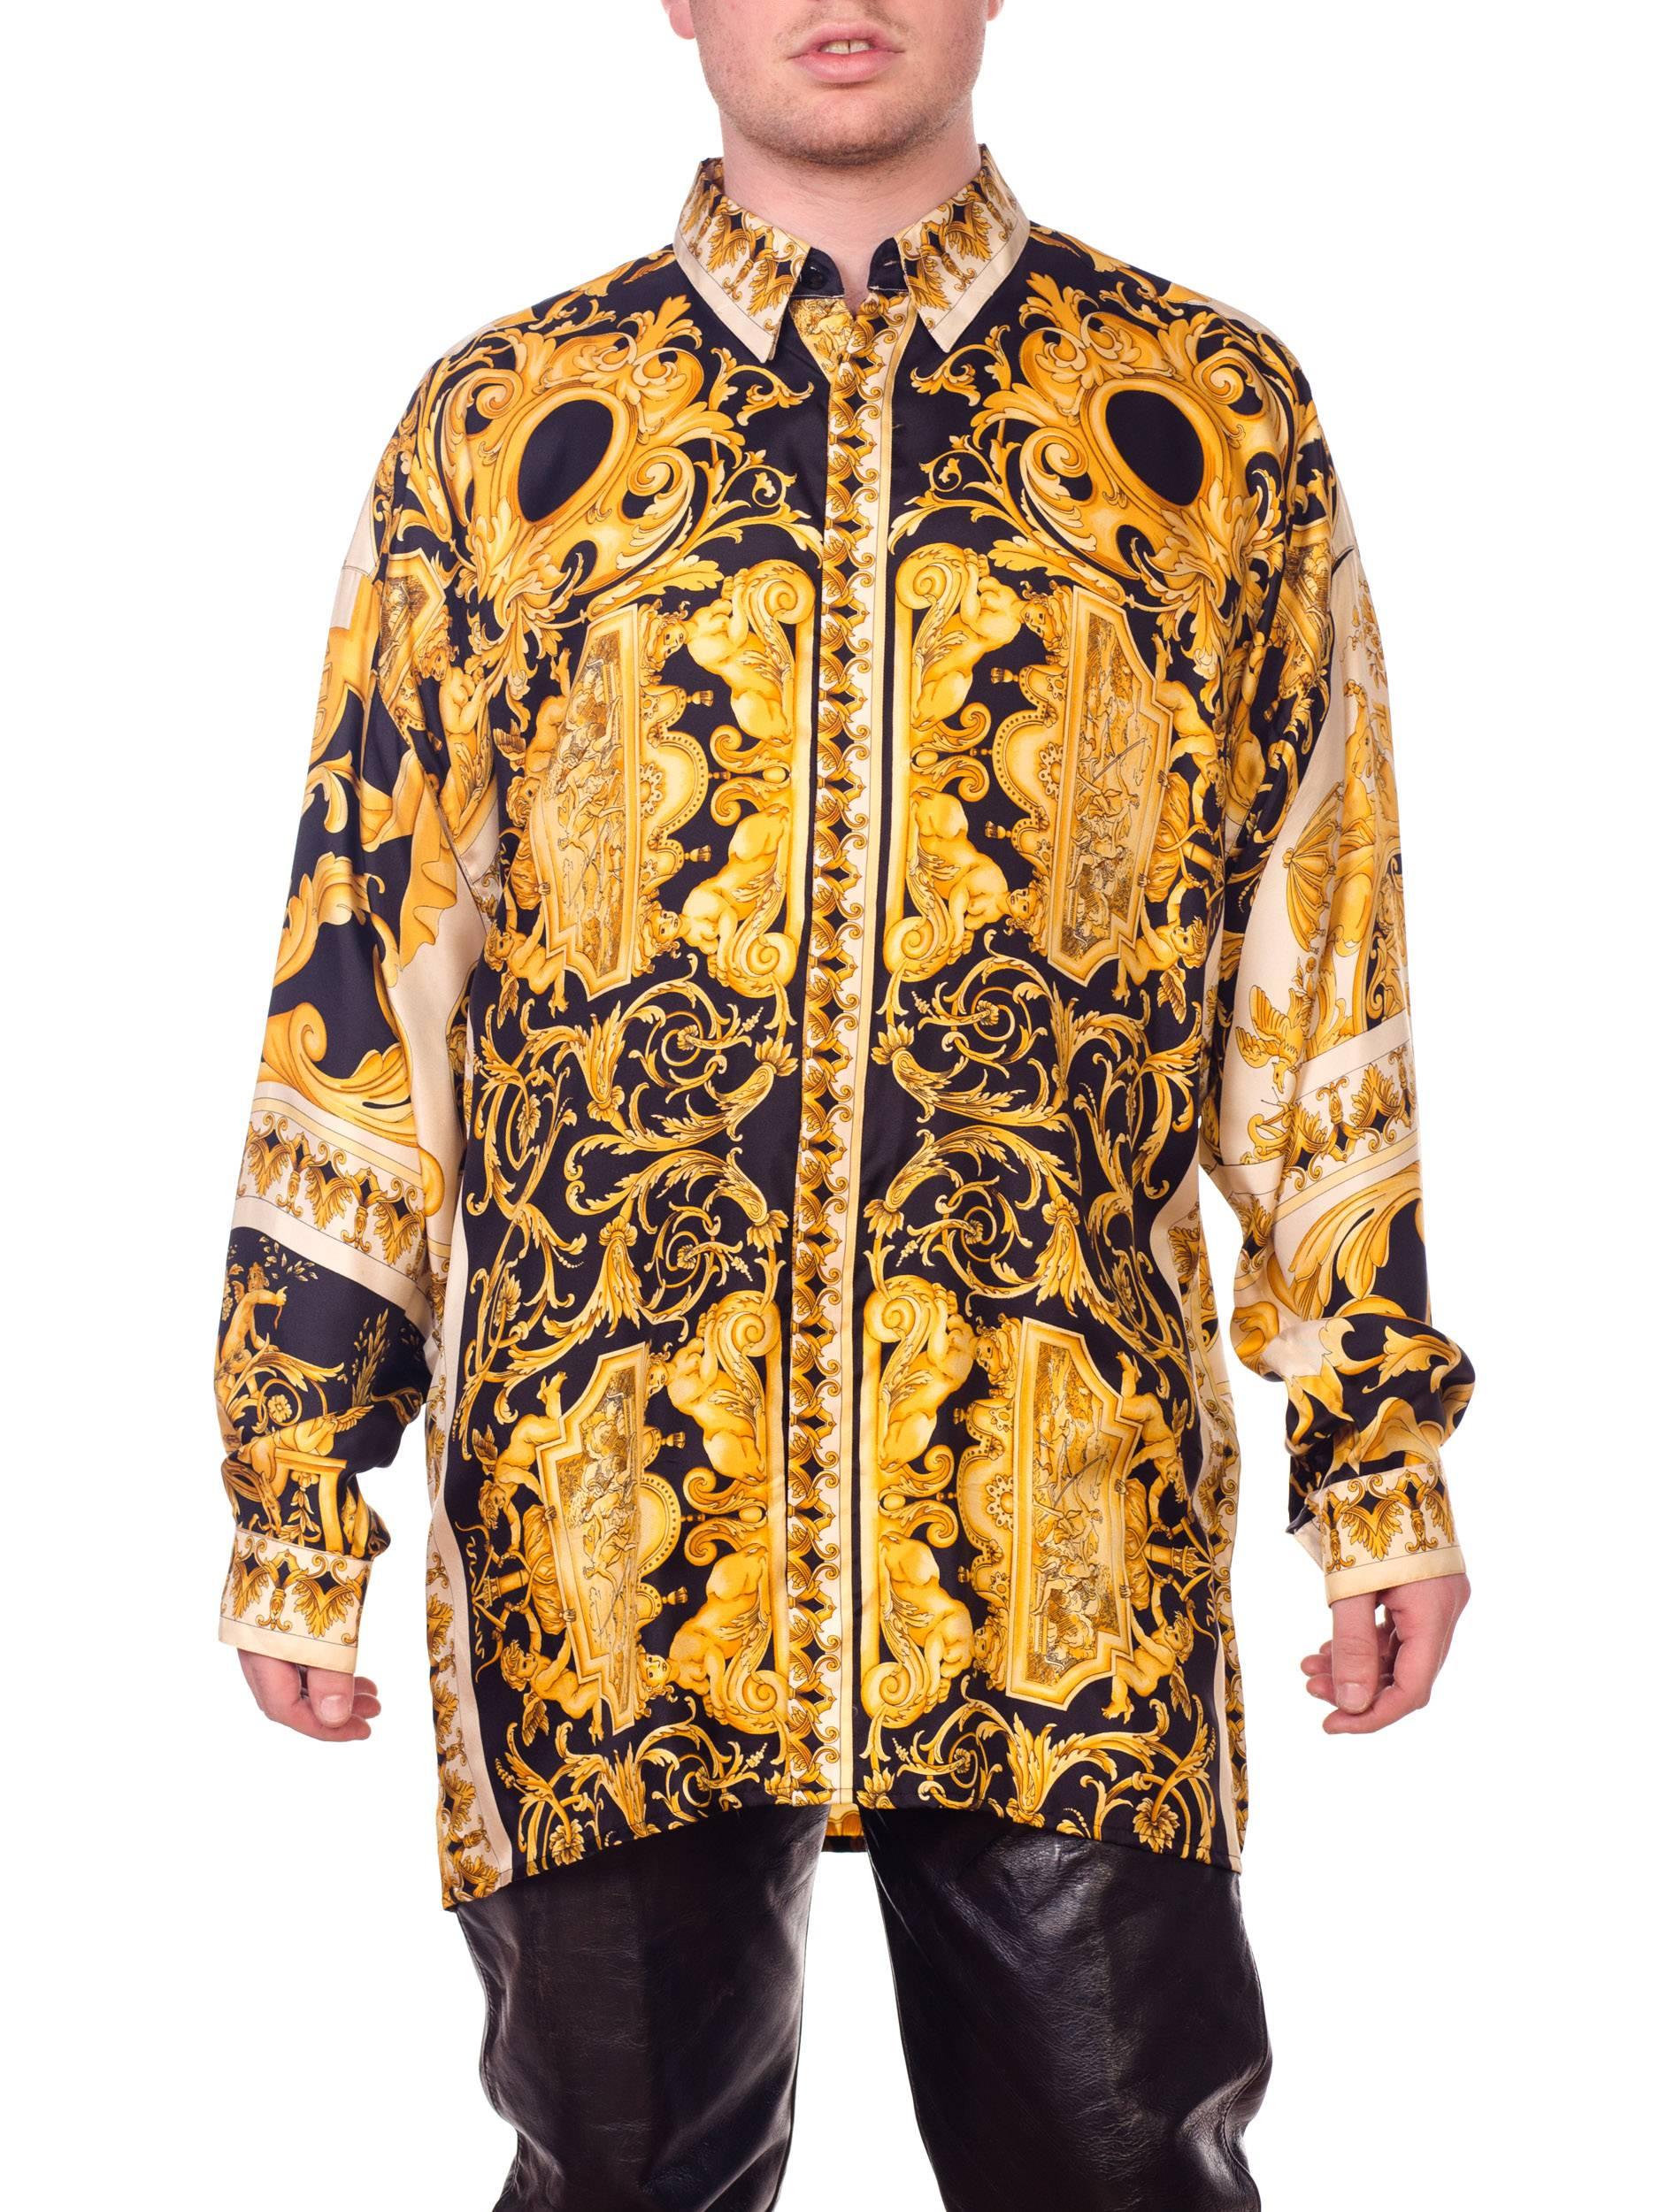 Atelier Gianni Versace Silk Gold Filigree Shirt, 1990s  In Excellent Condition In New York, NY